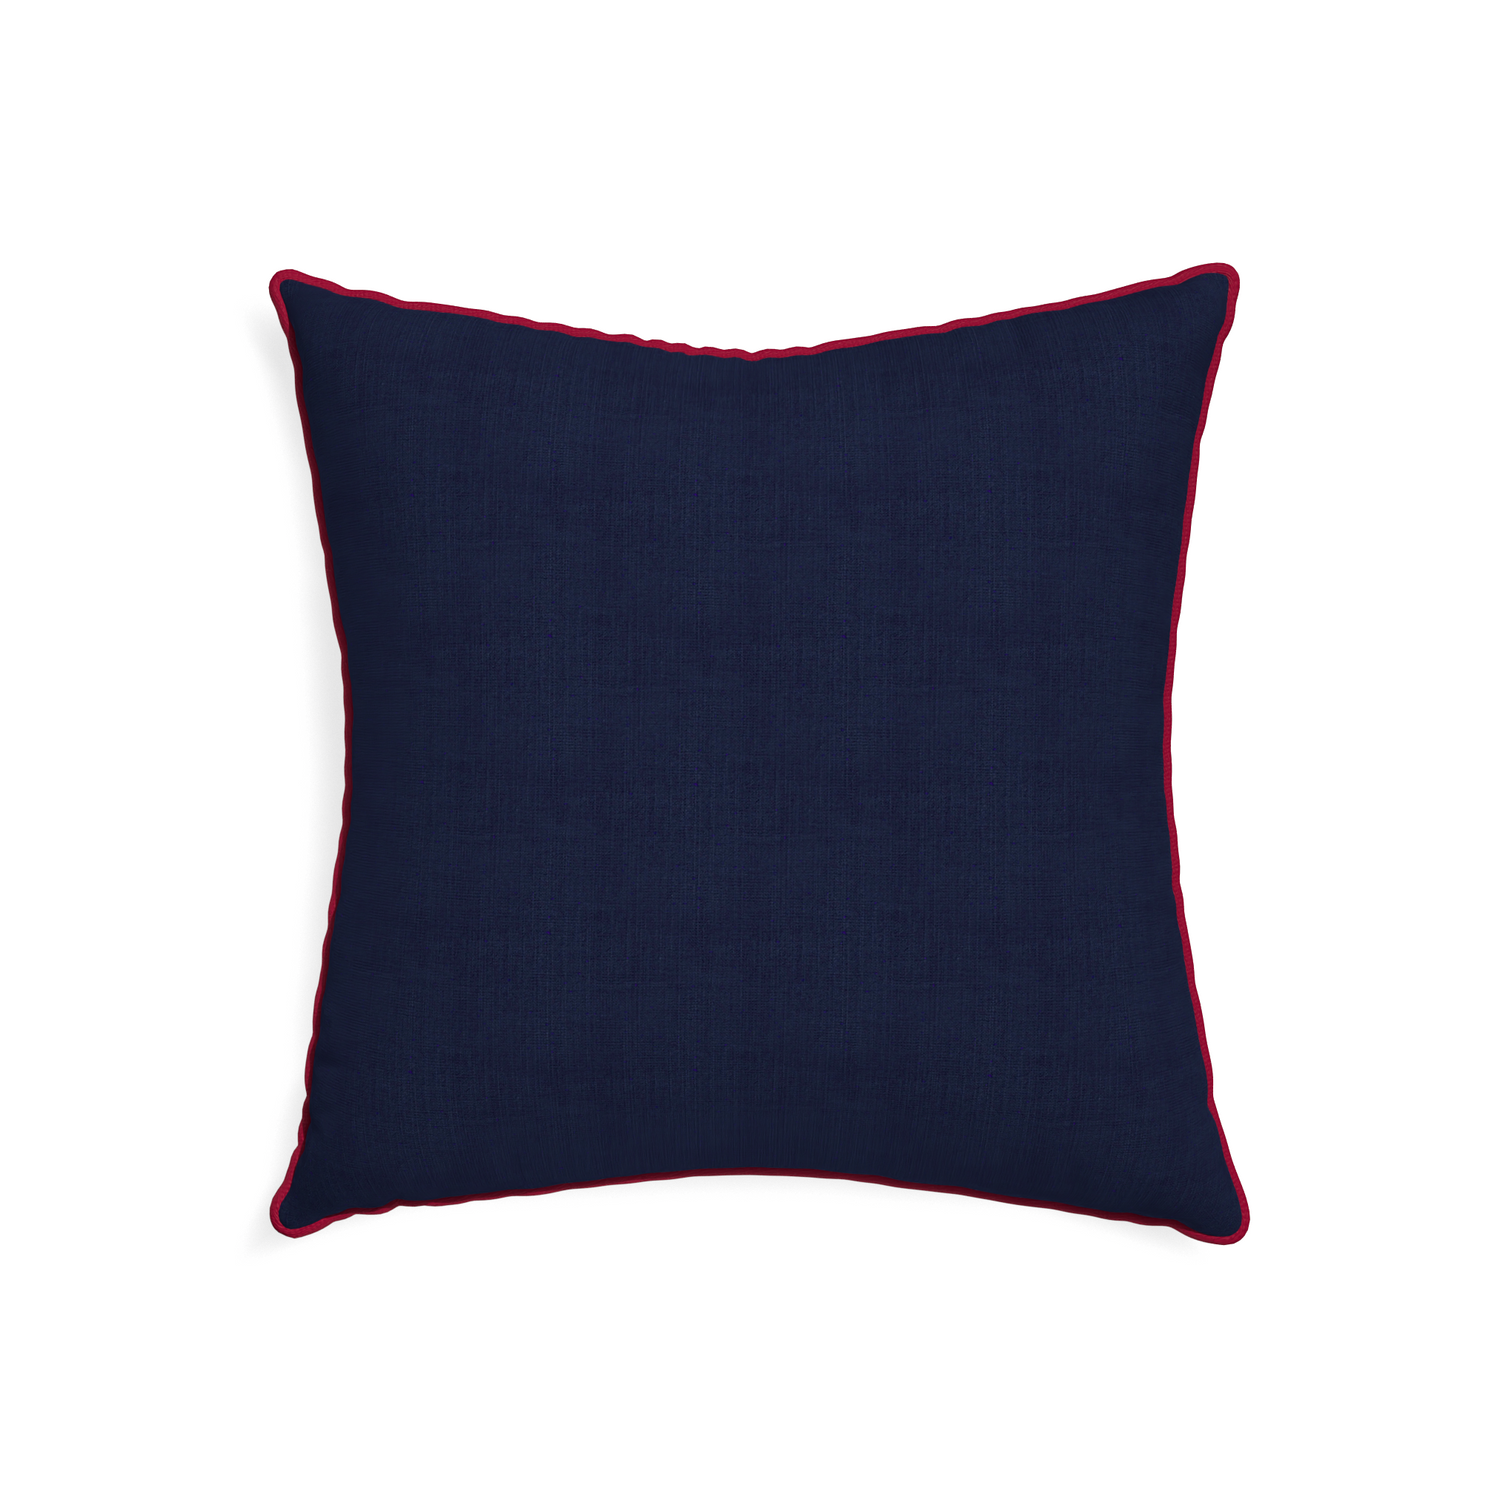 22-square midnight custom pillow with raspberry piping on white background